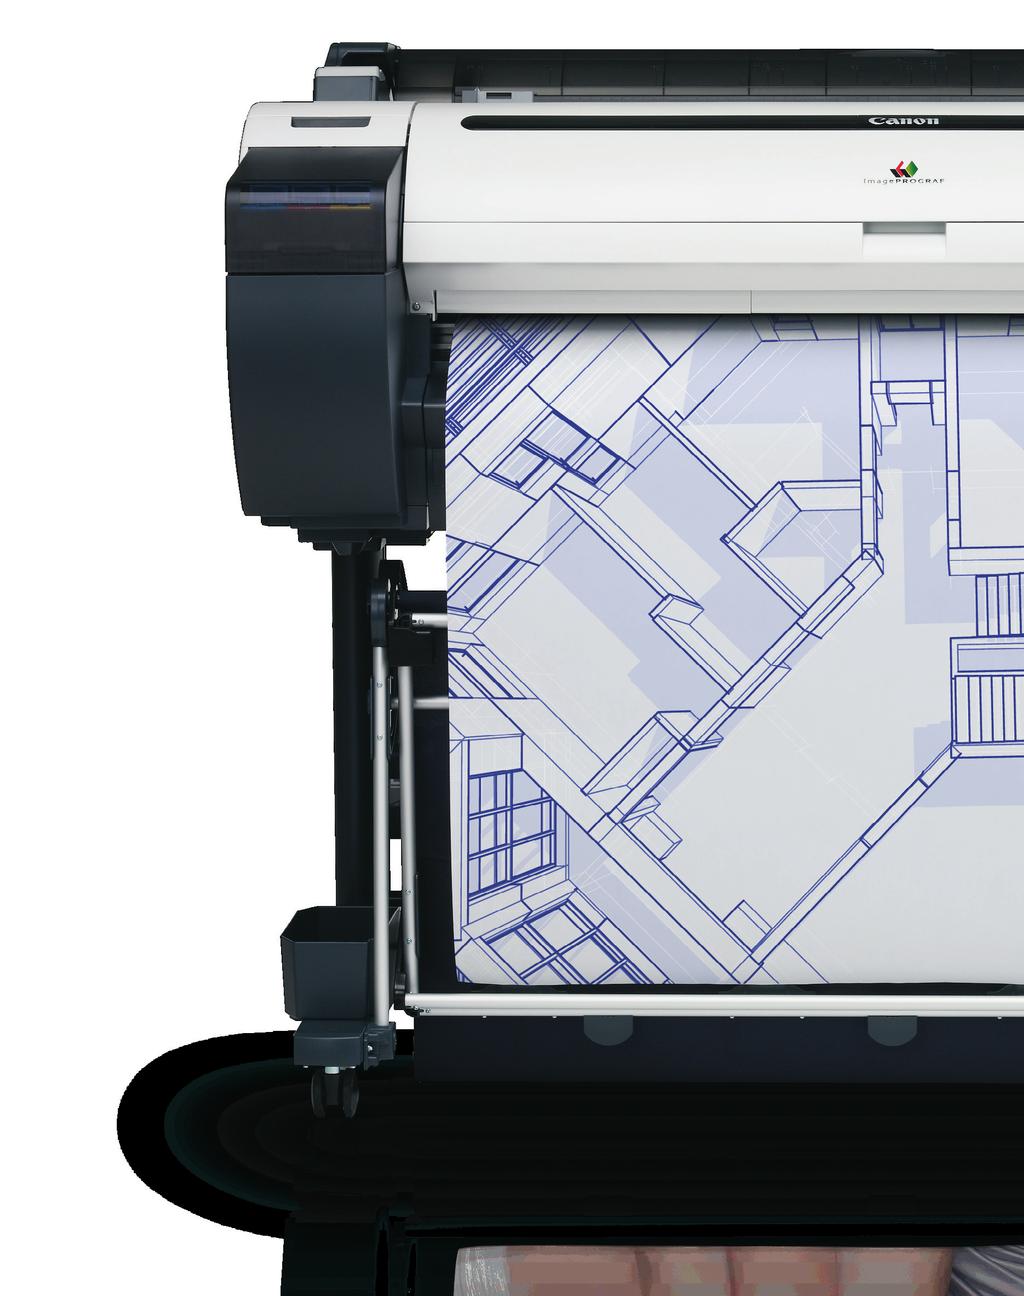 Focused on your business to make a big difference The innovative features included within the CAD & GIS range have been designed to help you bring your best work to light.